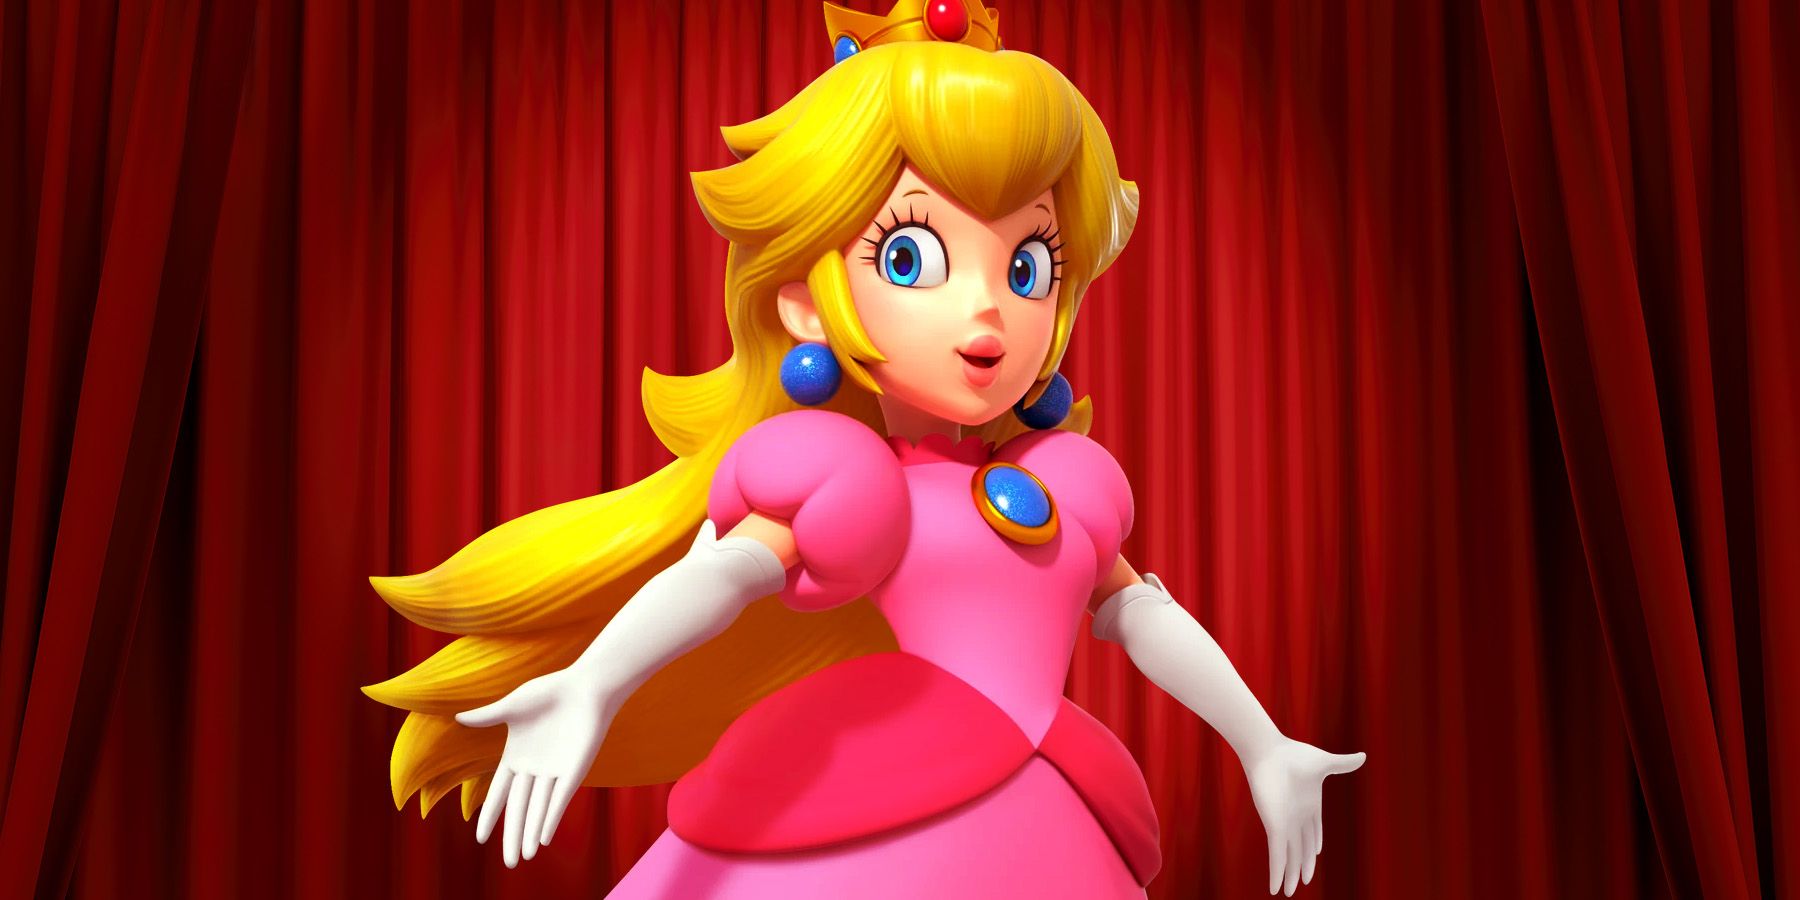 How Old is Peach